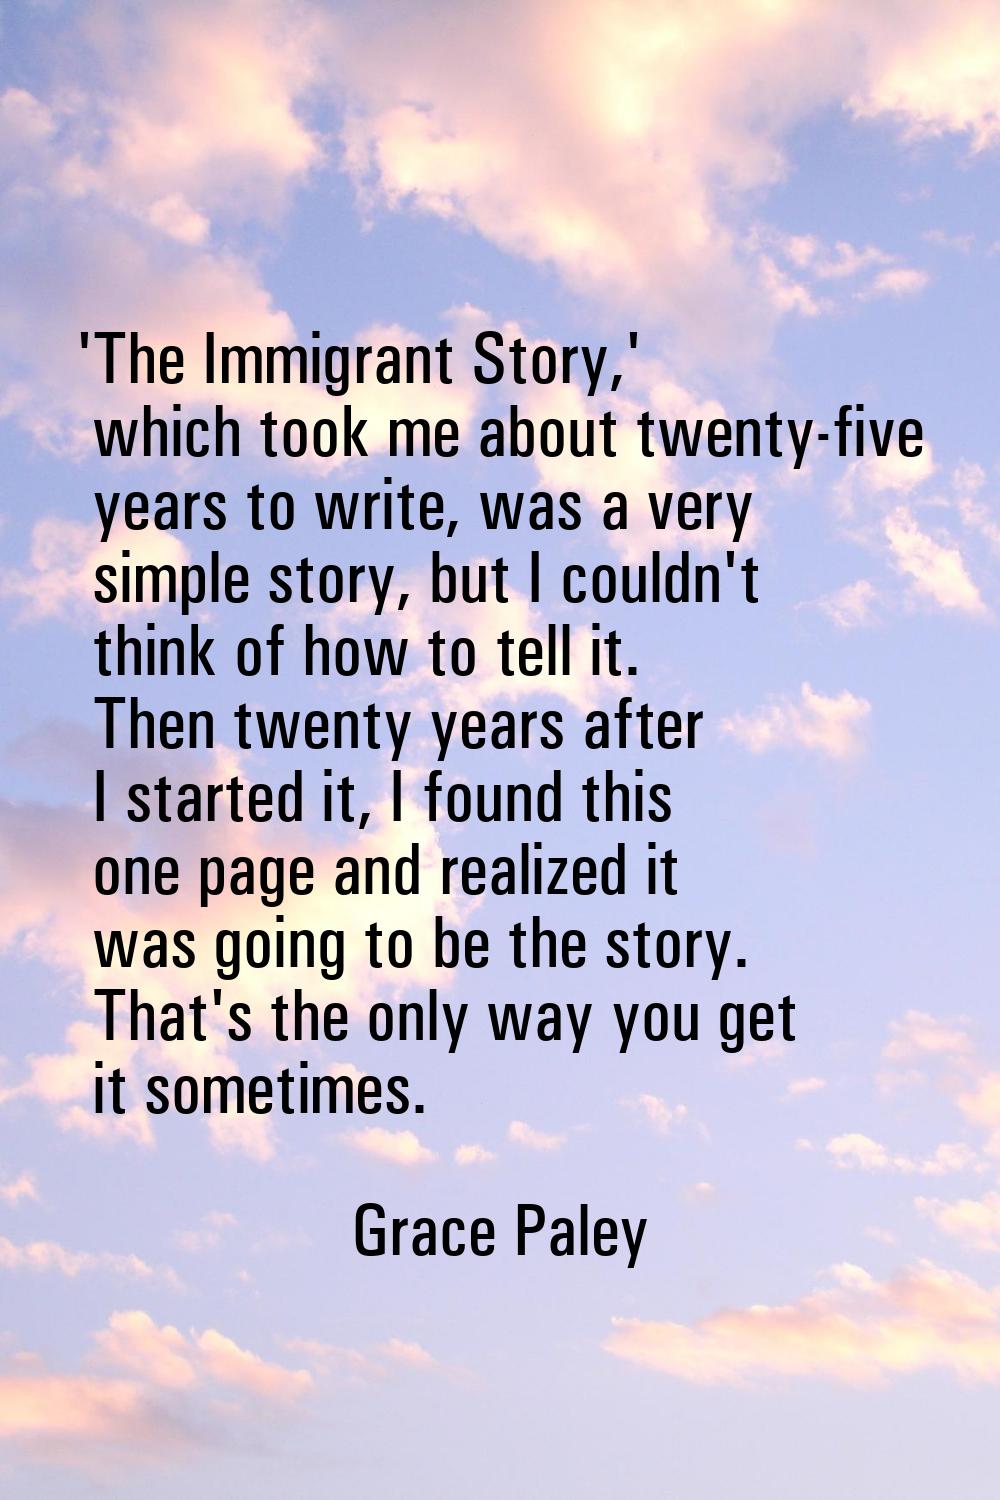 'The Immigrant Story,' which took me about twenty-five years to write, was a very simple story, but